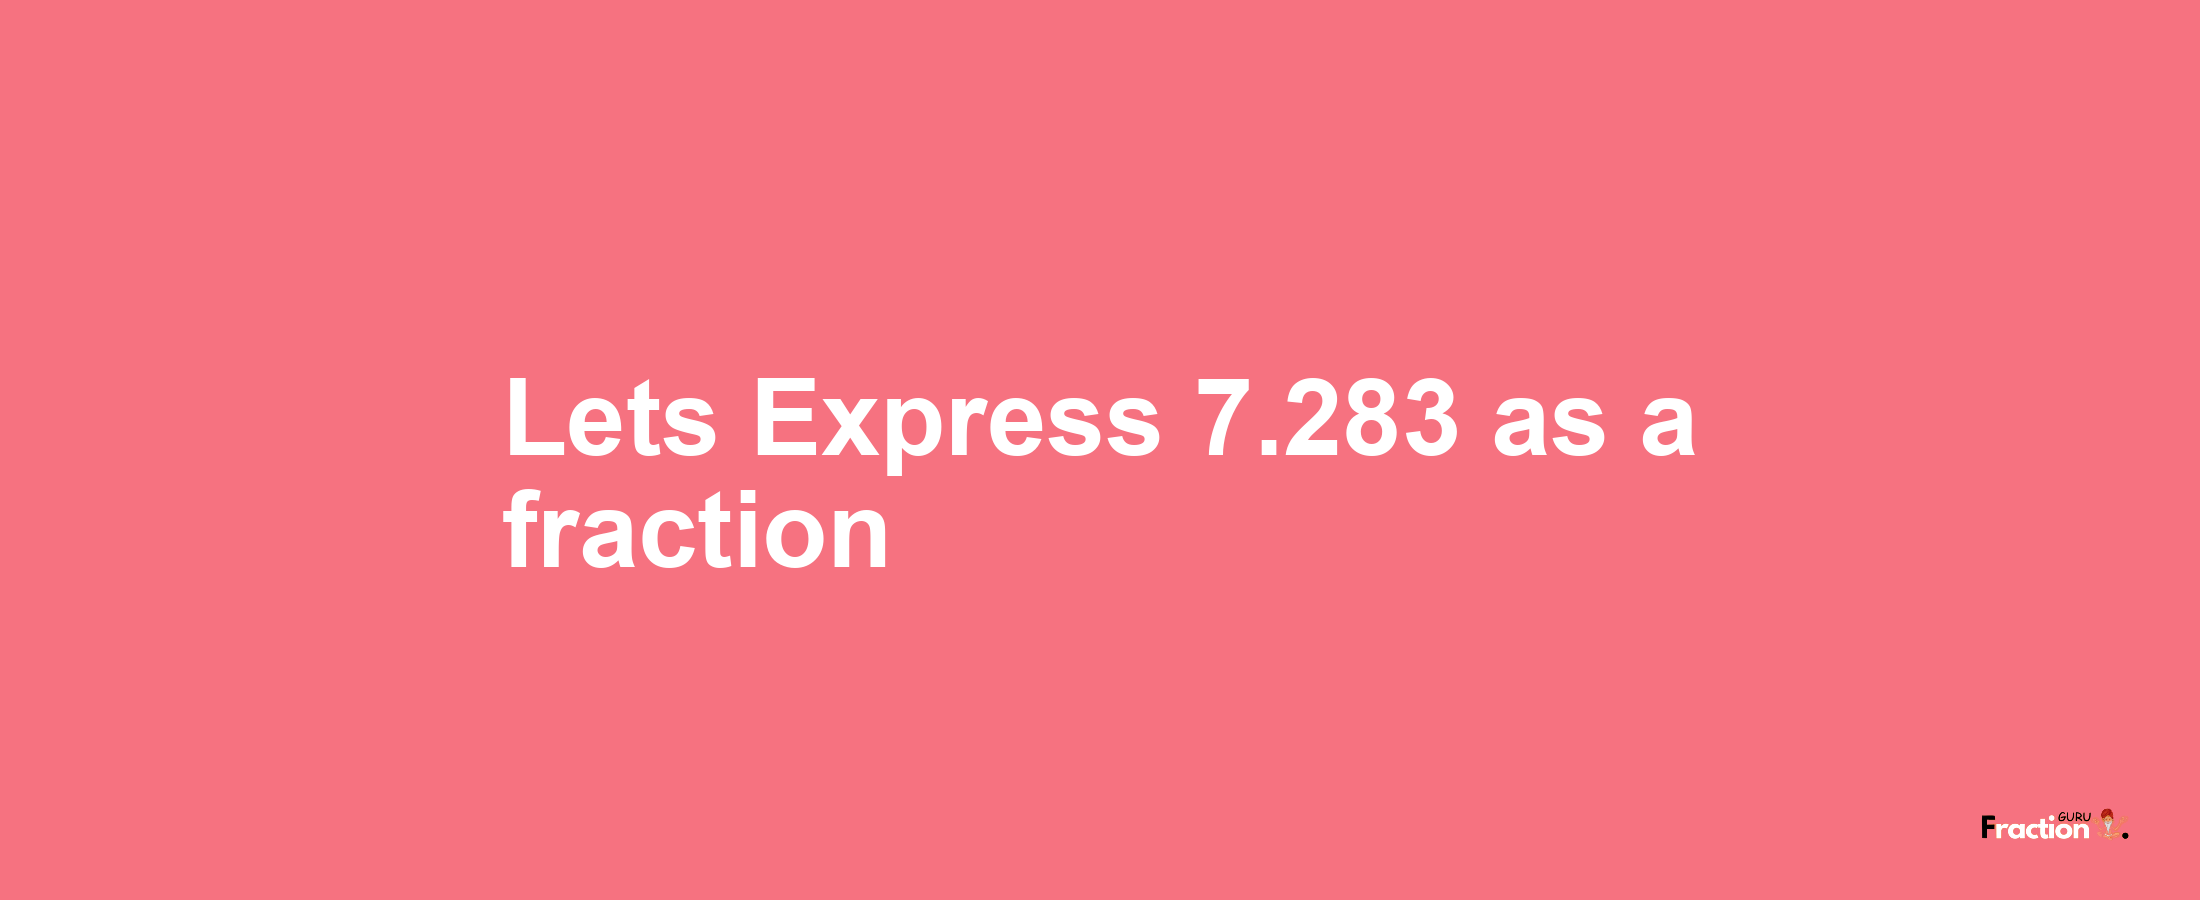 Lets Express 7.283 as afraction